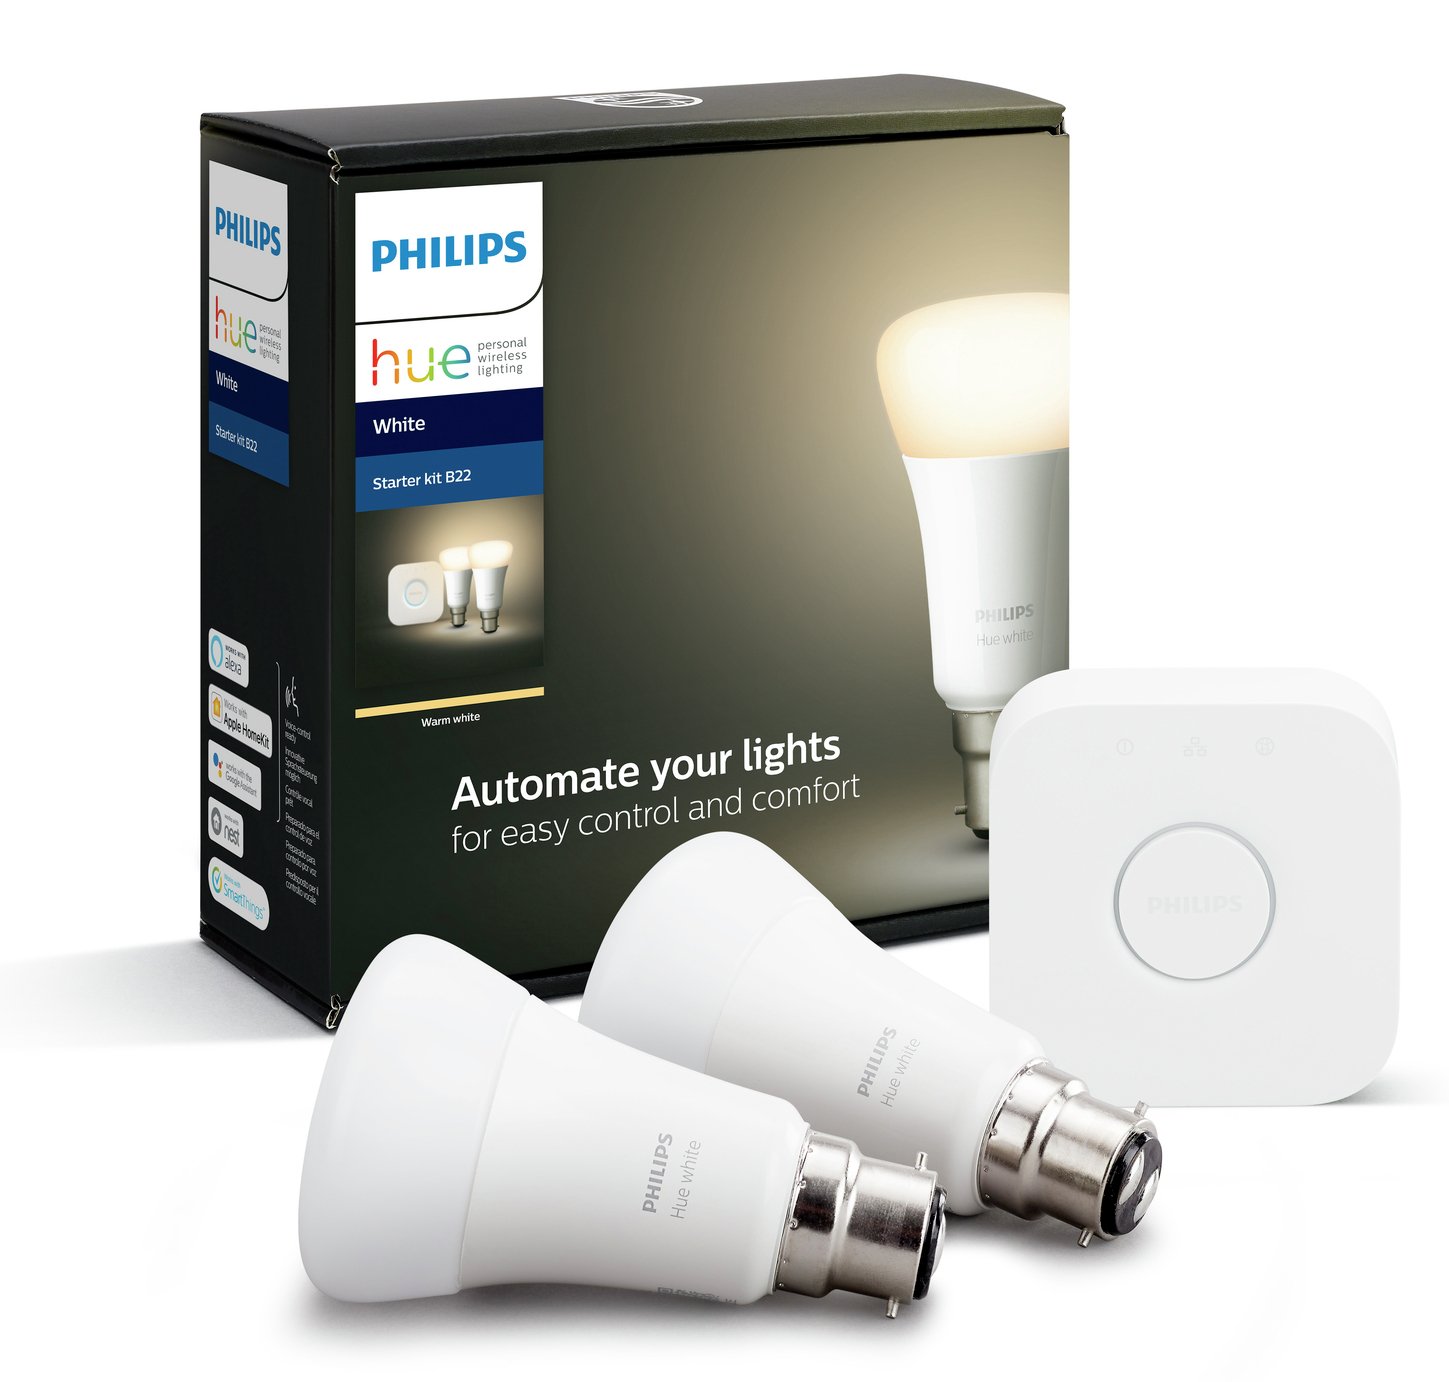 Philips Hue Starter Kit with White B22 Bulb Review